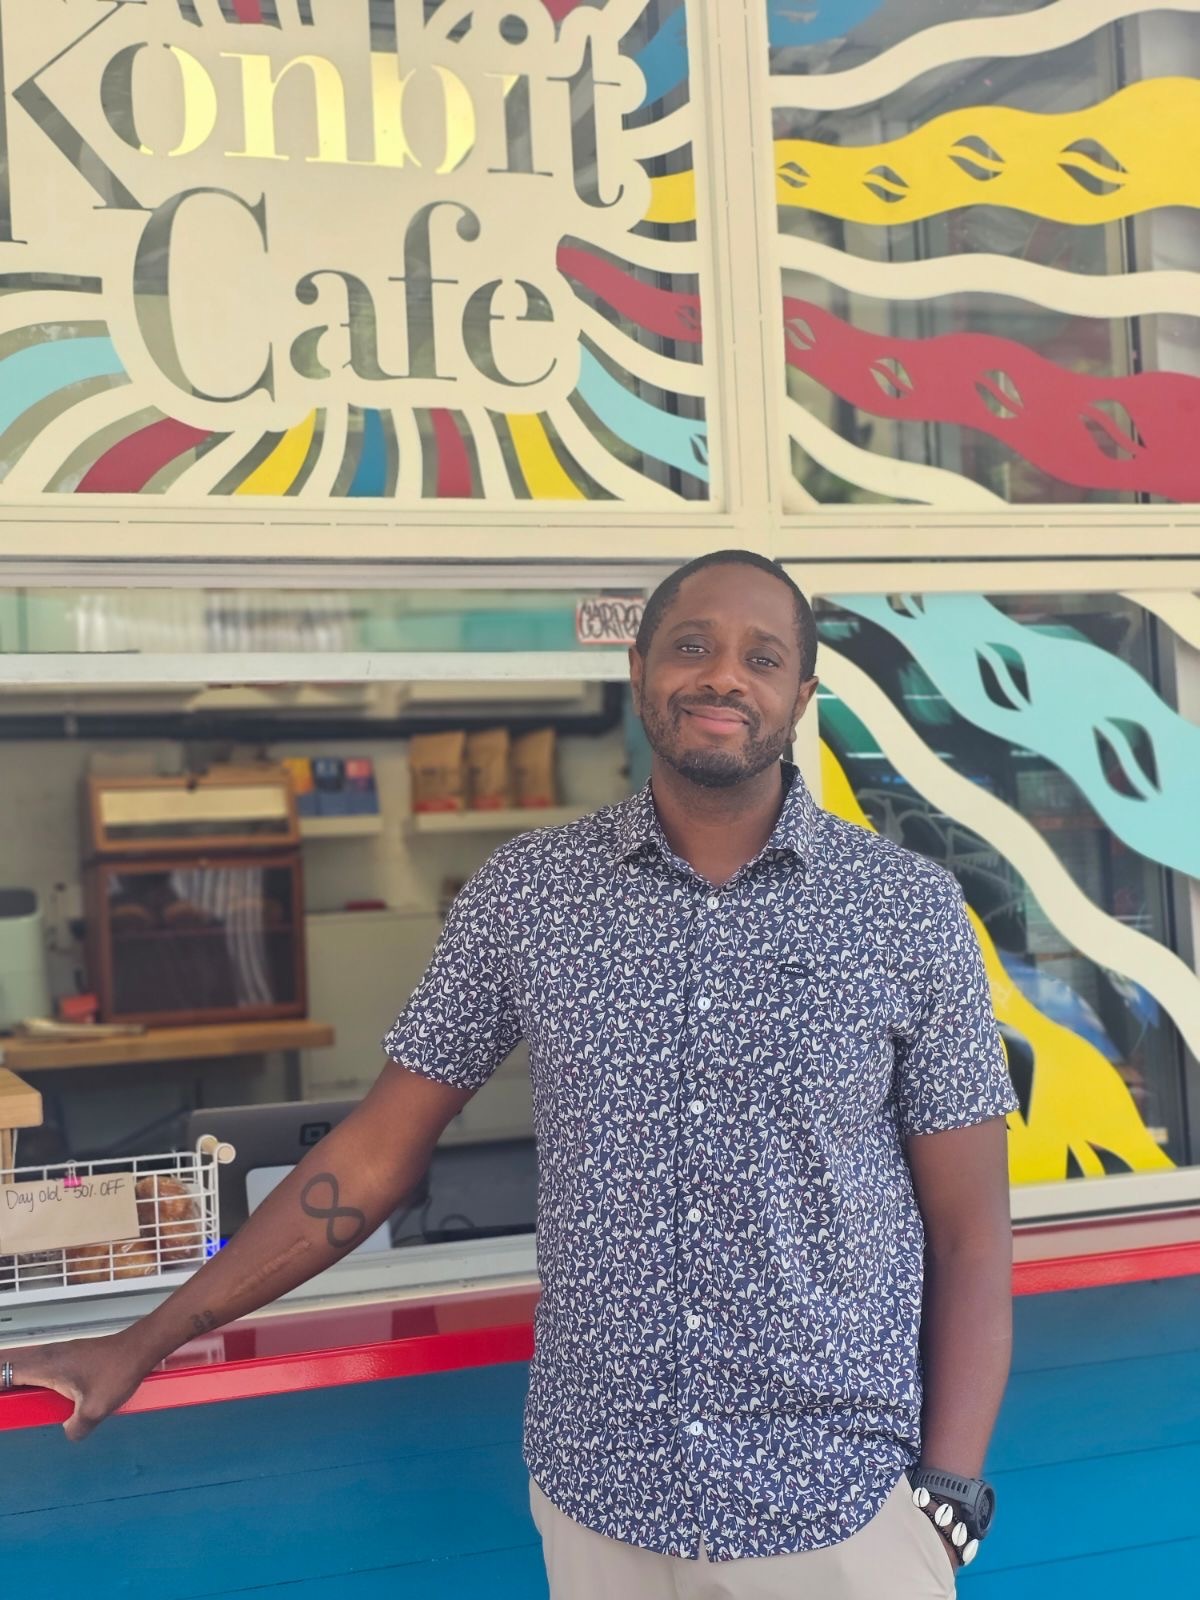 Get to know more about David and Konbit Cafe in this week’s Business Spotlight Q&A